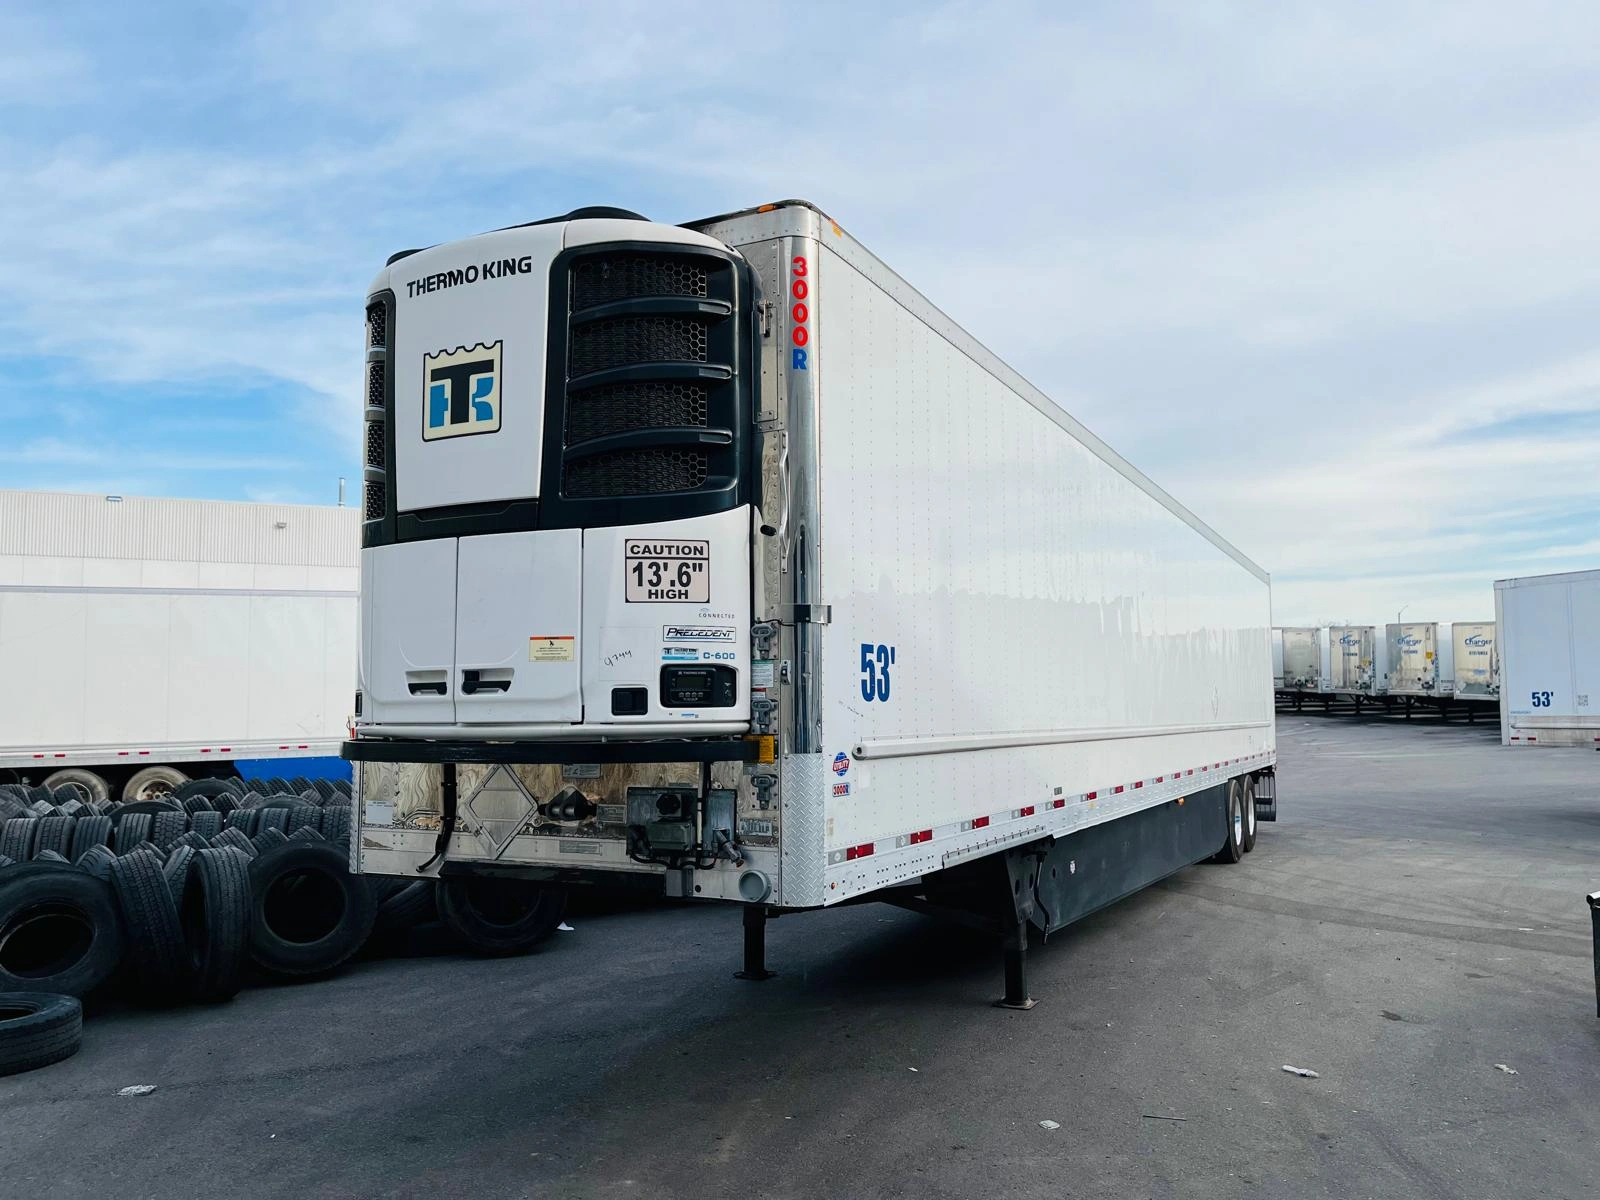 Utility Thermo king C-600 Reefer